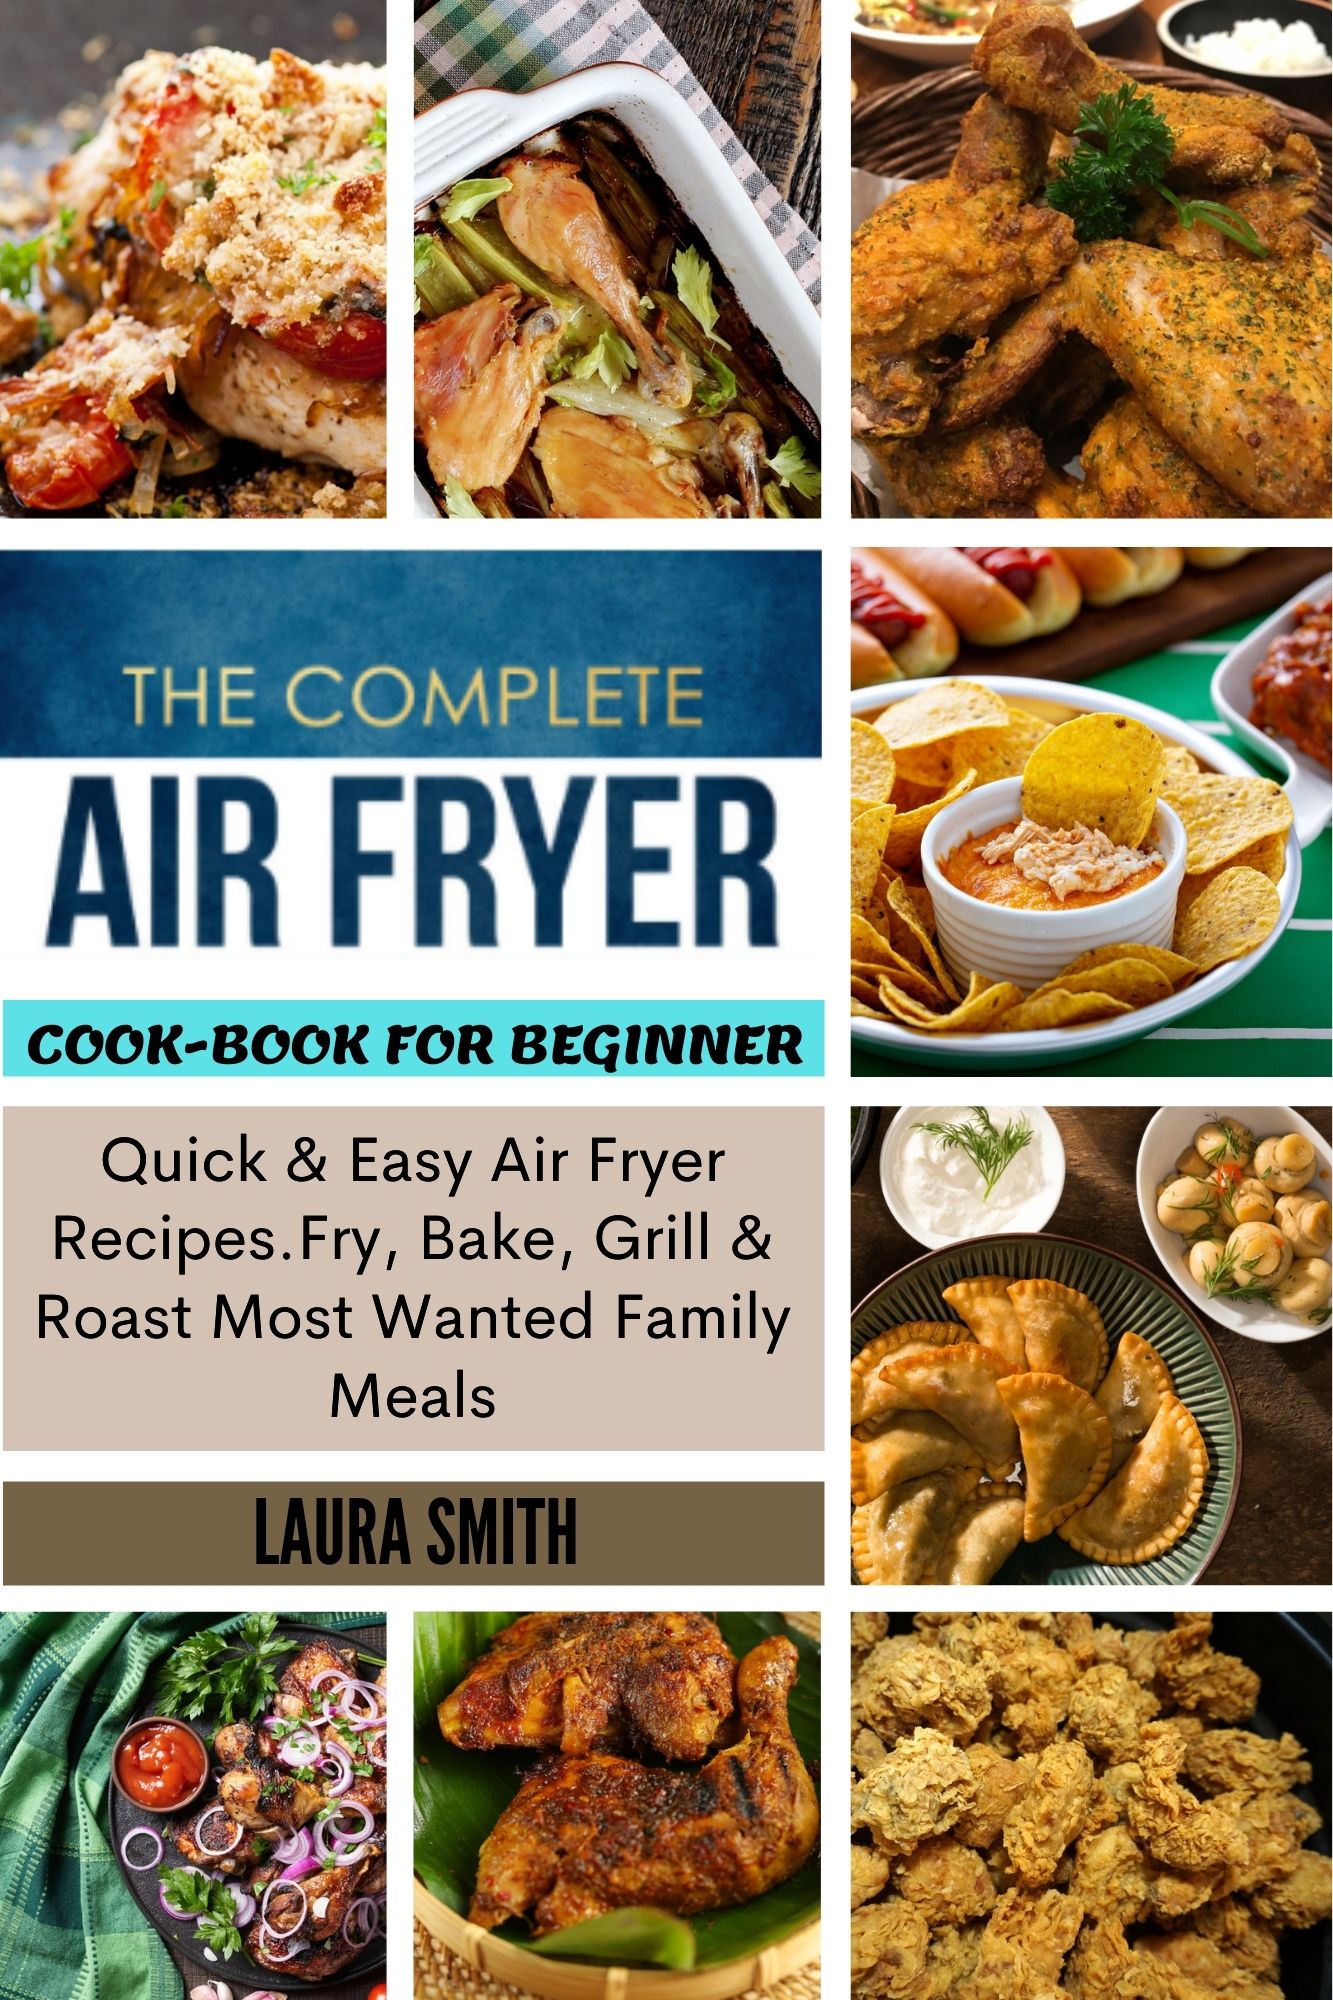 FREE: The Complete Air Fryer Cookbook for Beginners by Laura Smith